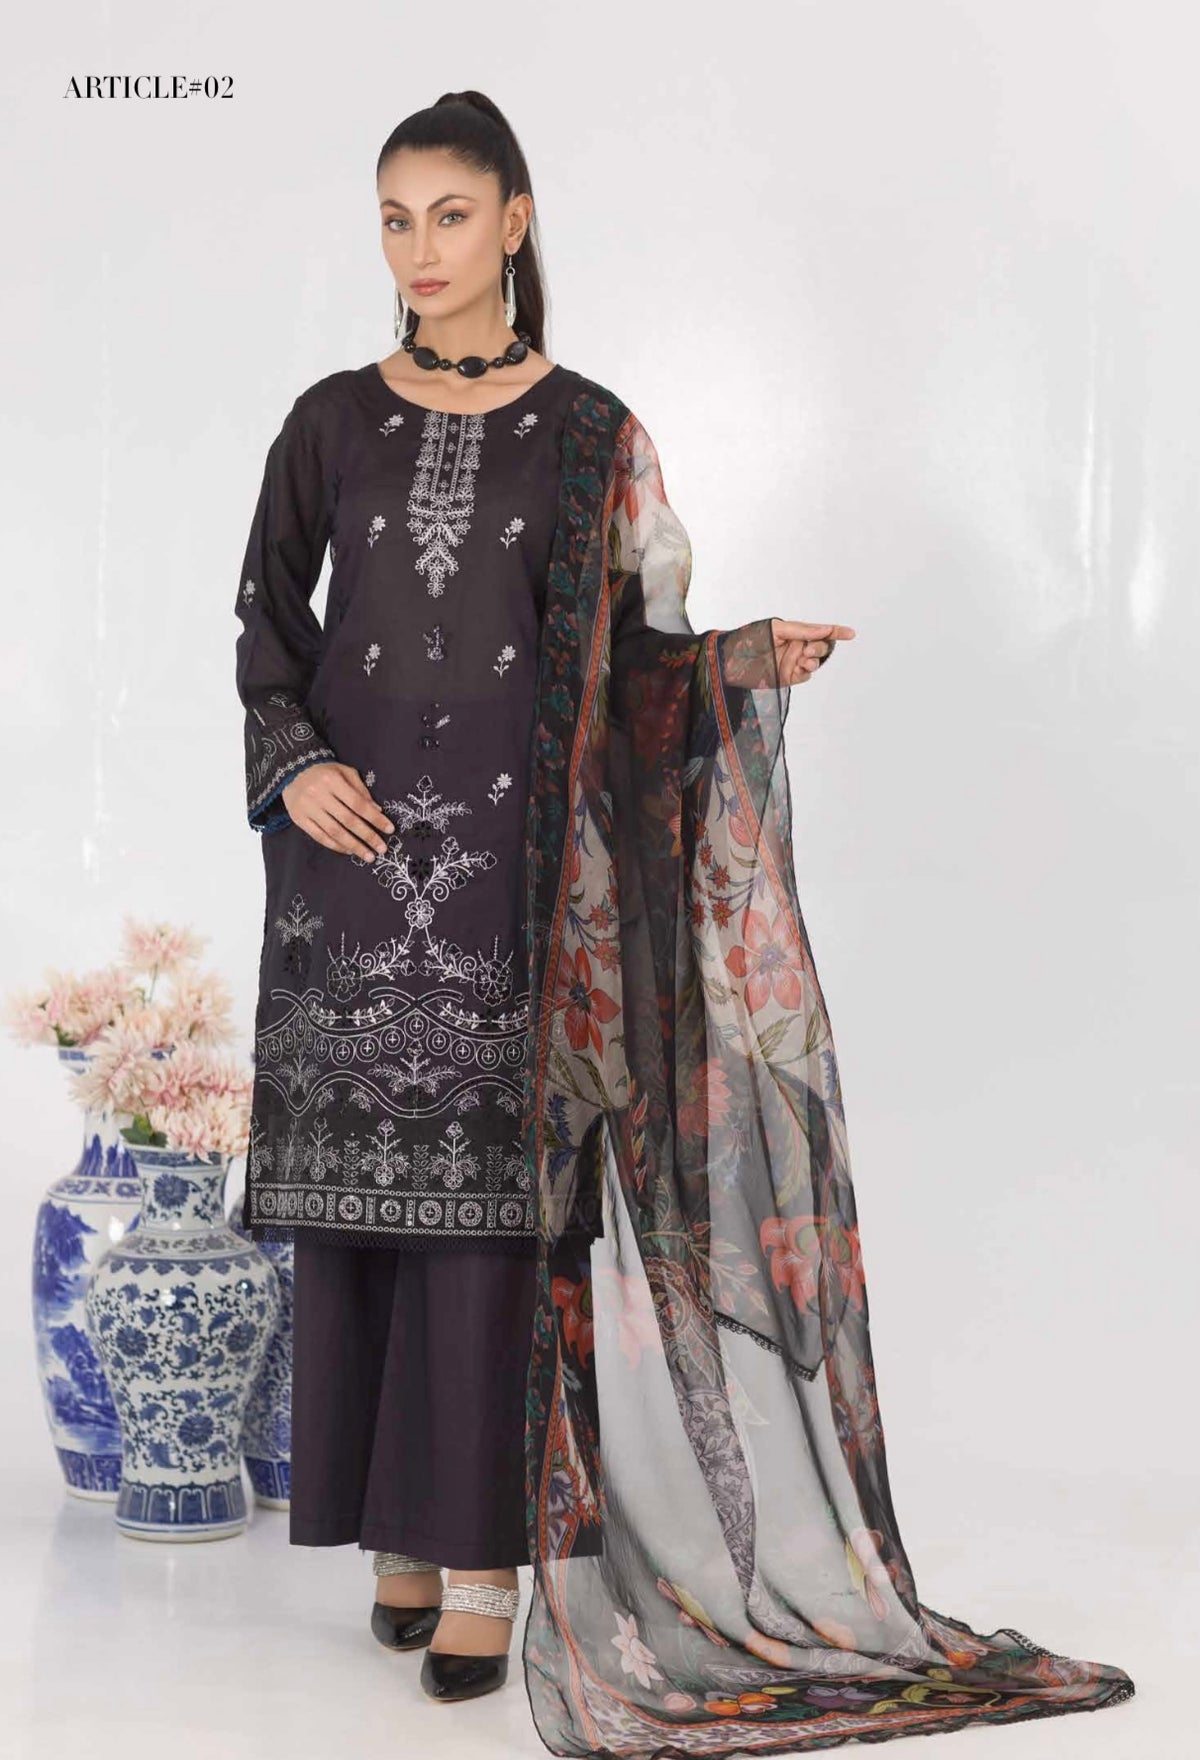 SIMRANS CHICKENKARI 3PC EMBROIDERED READYMADE ARTICLE-02